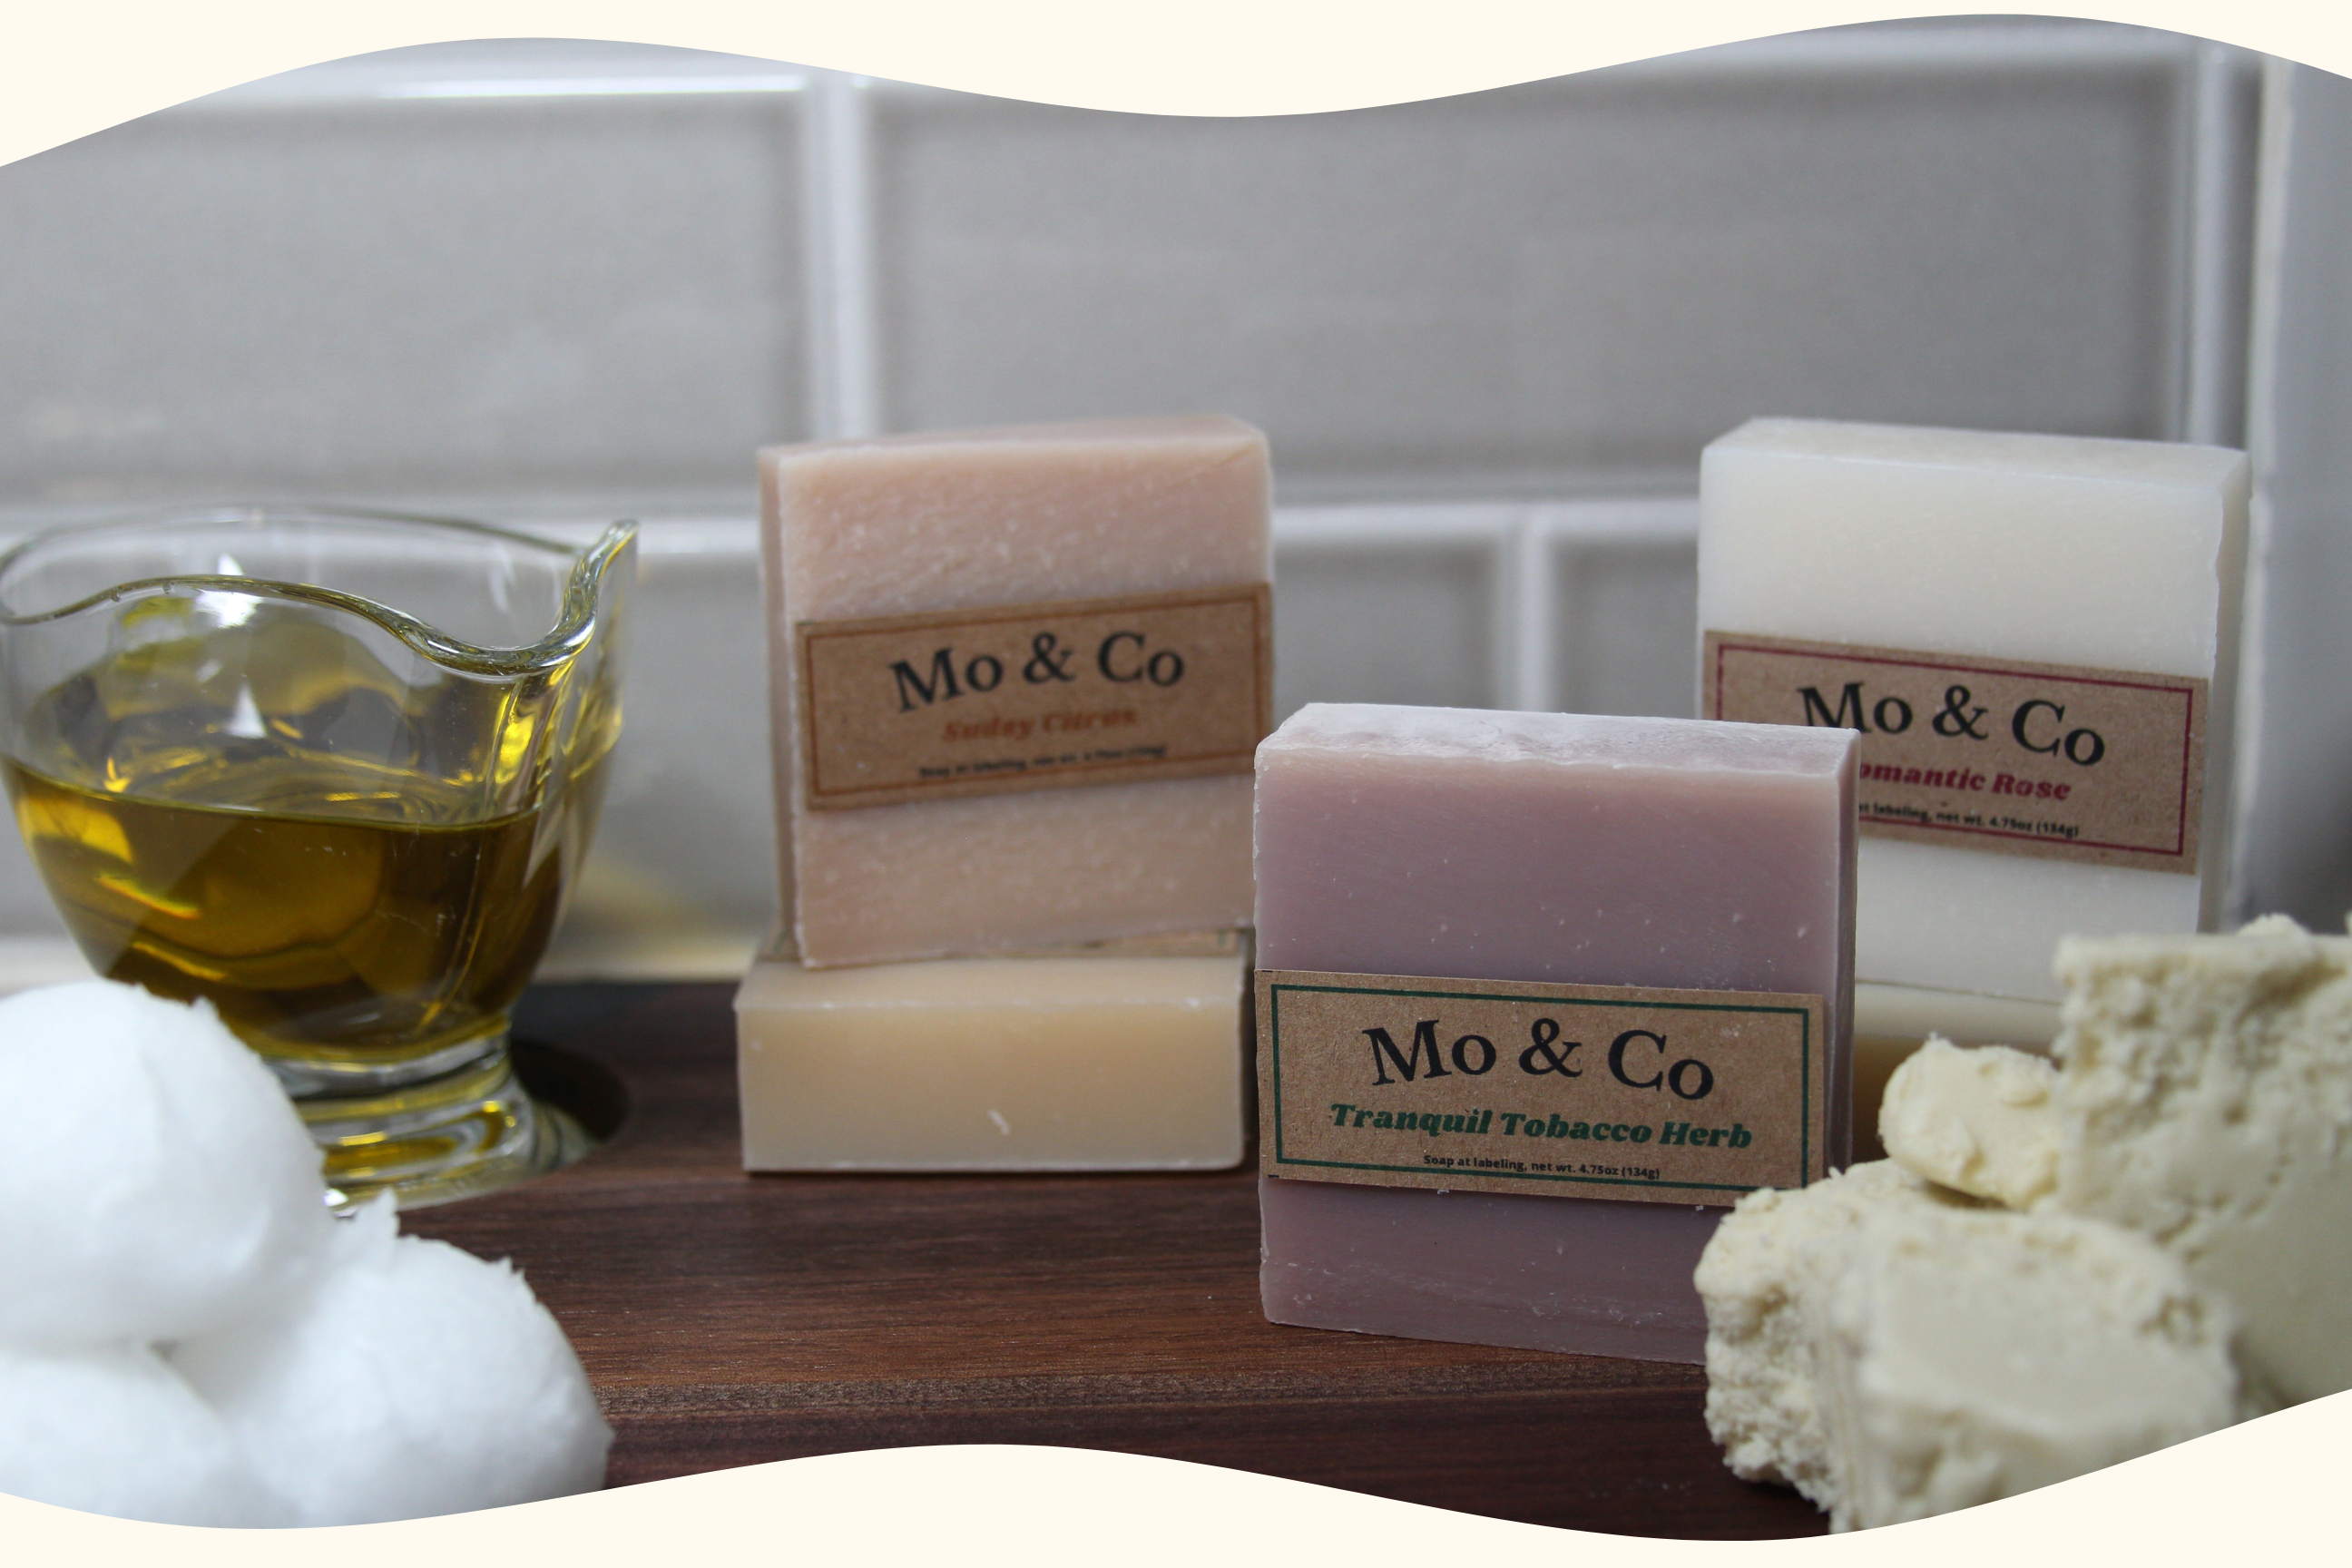 Mo & Co Handcrafted Soaps